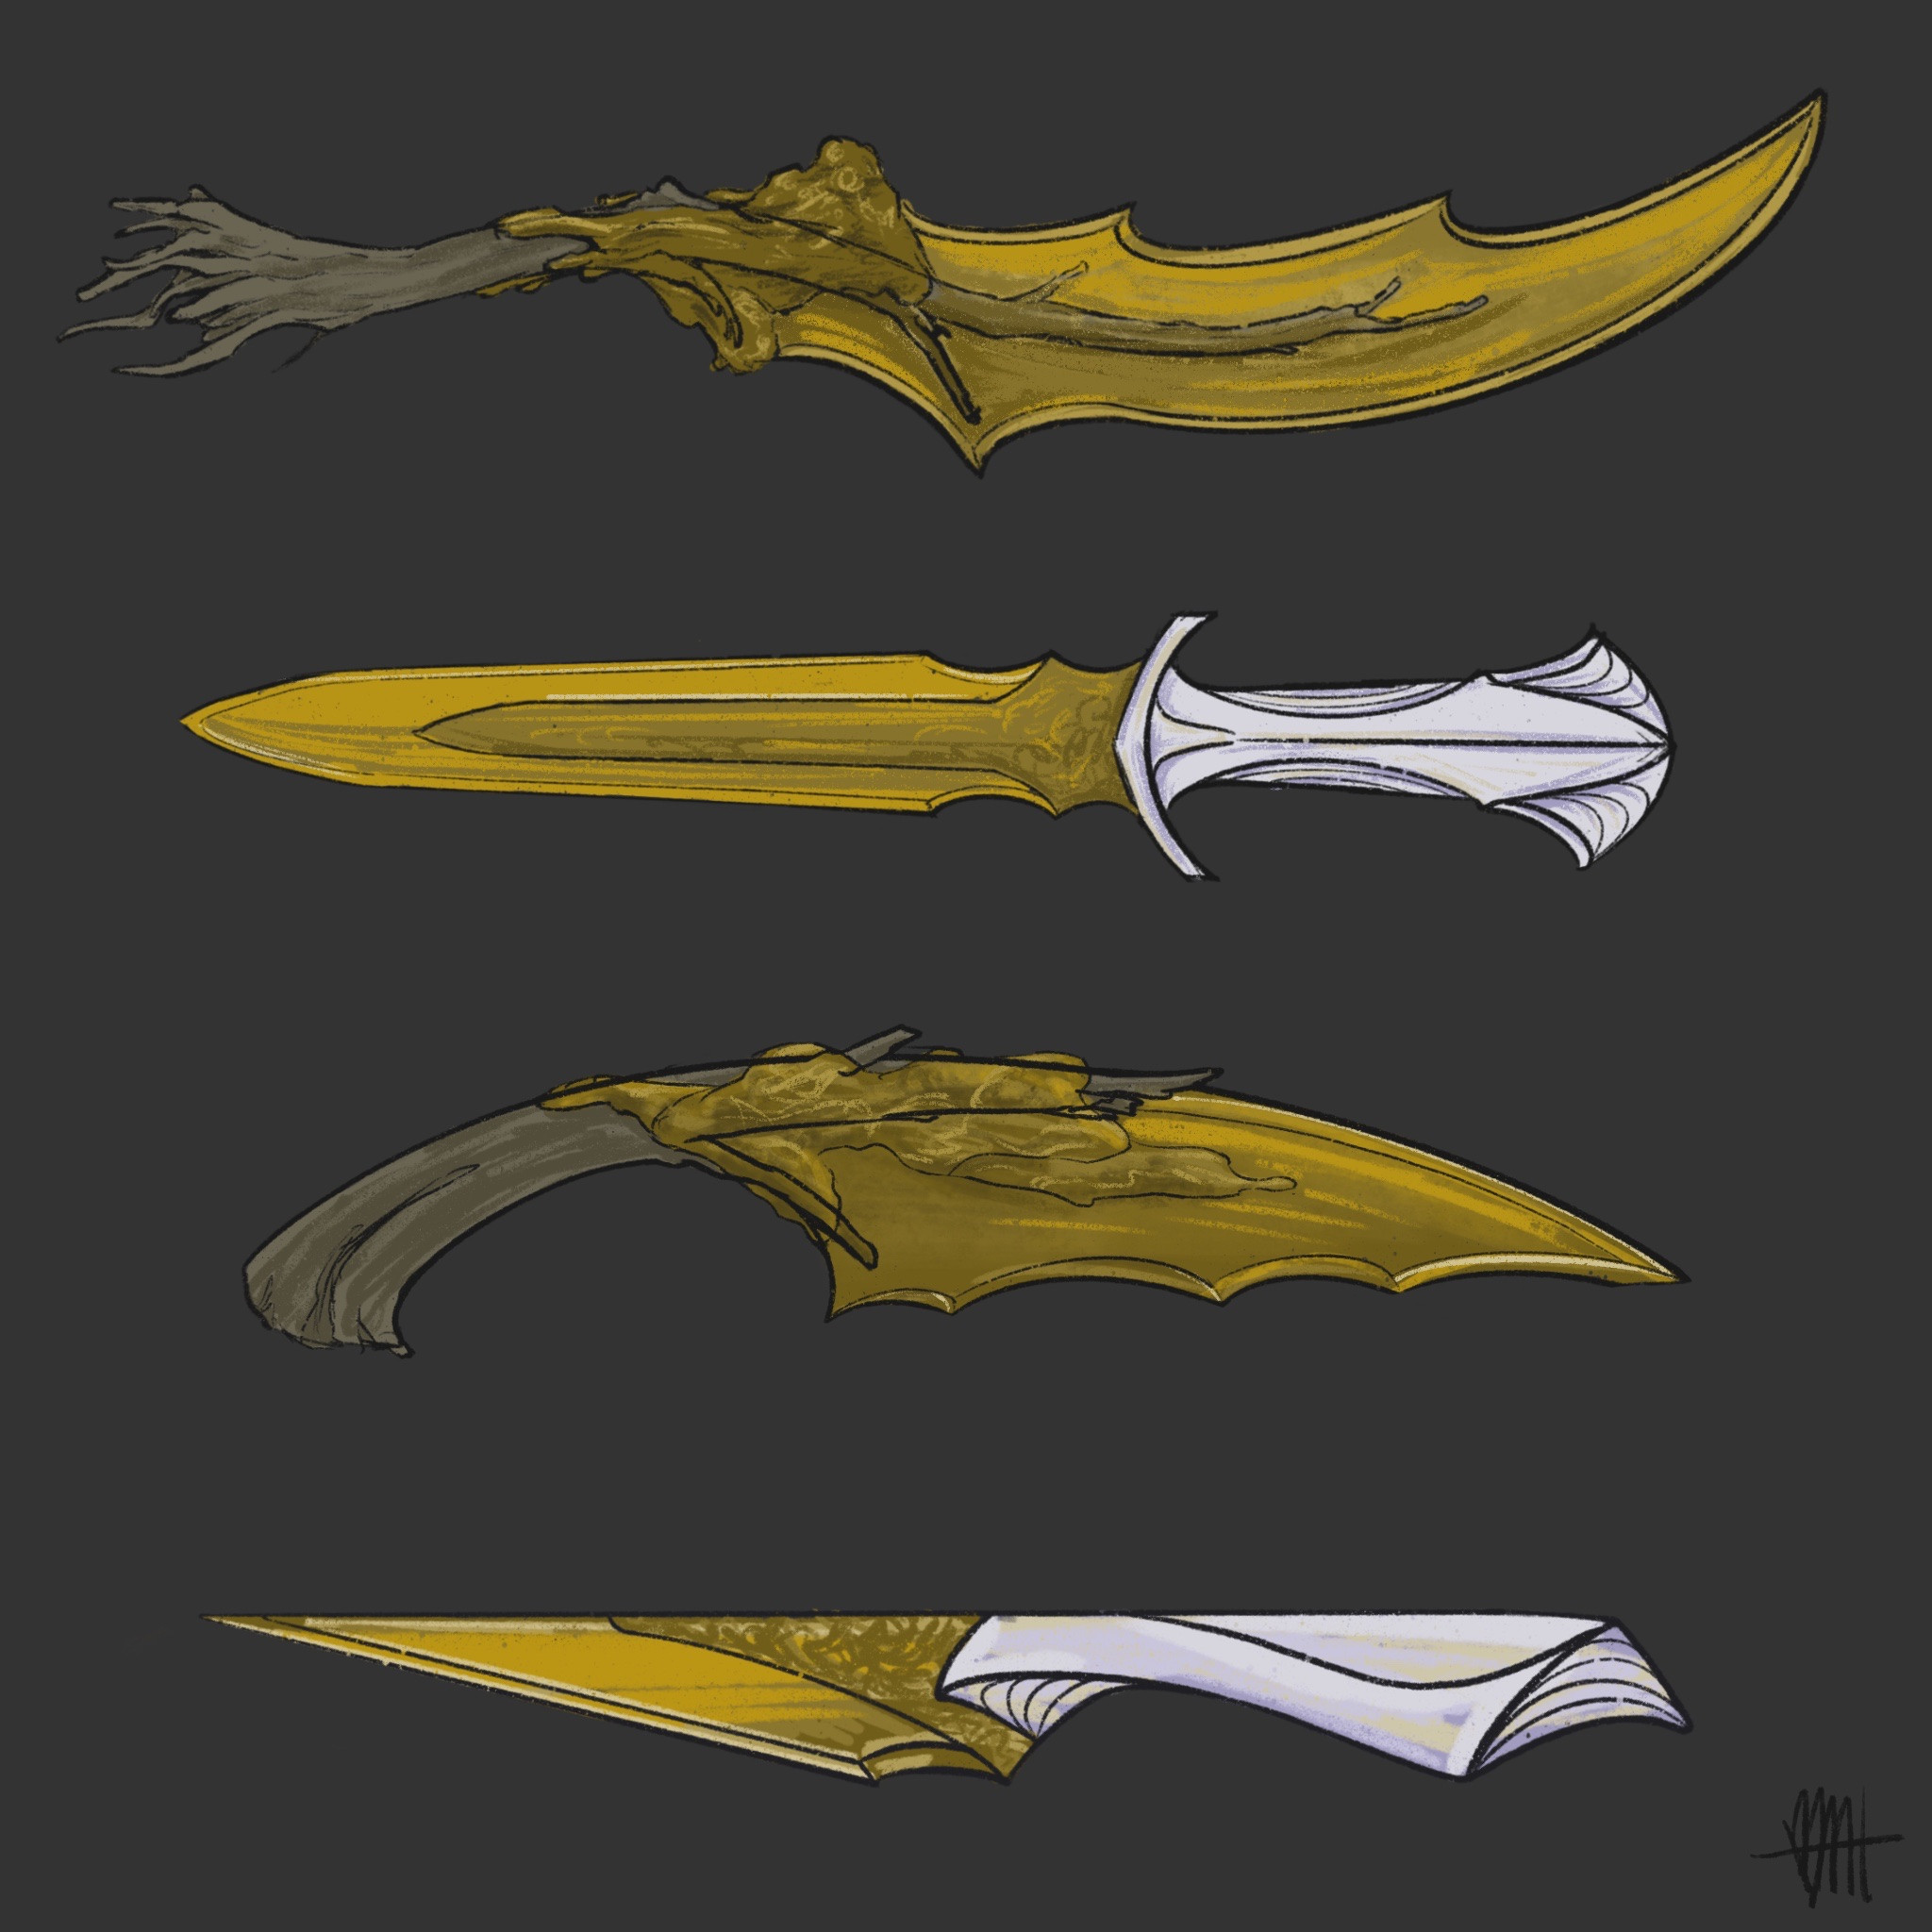 Amber knife concepts.